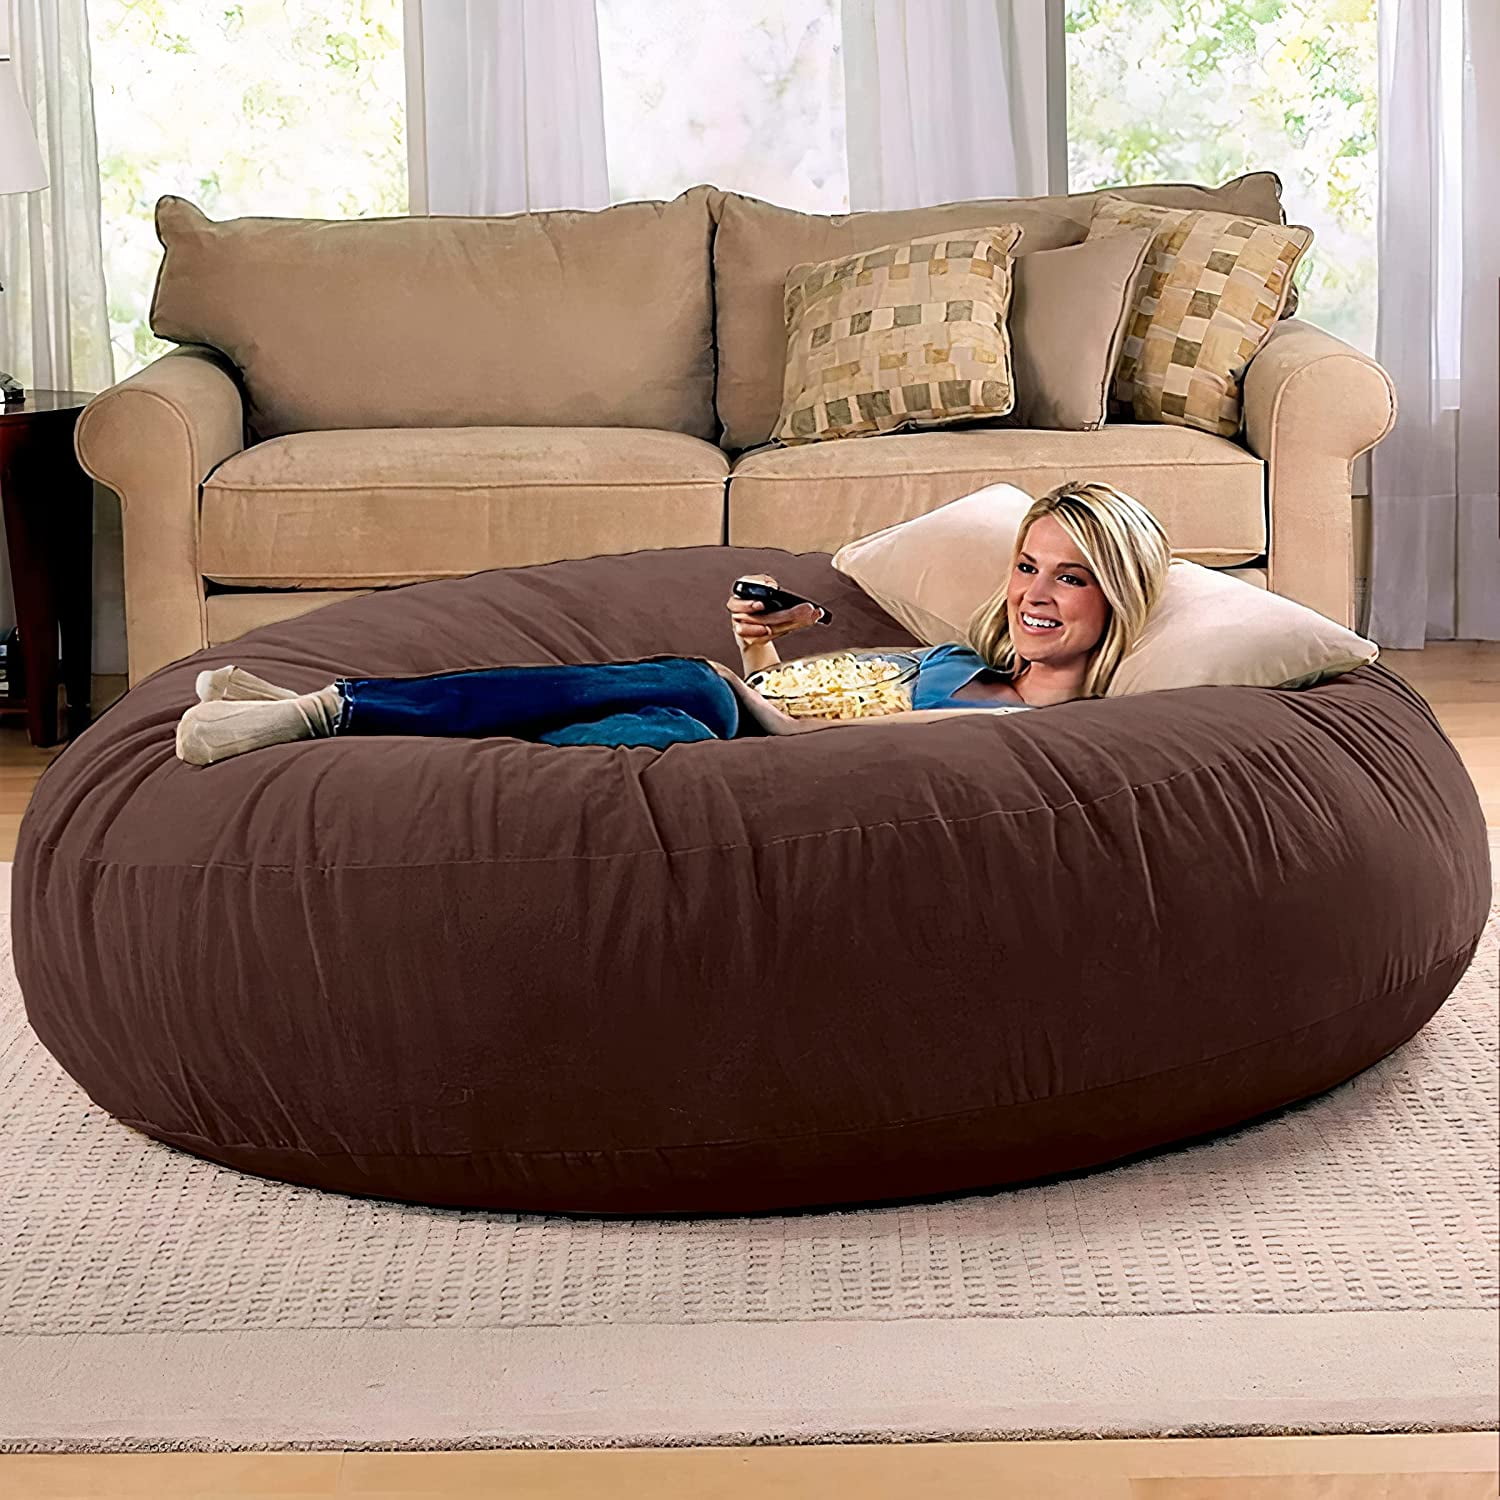 large bean bag bed, large bean bag bed Suppliers and Manufacturers at